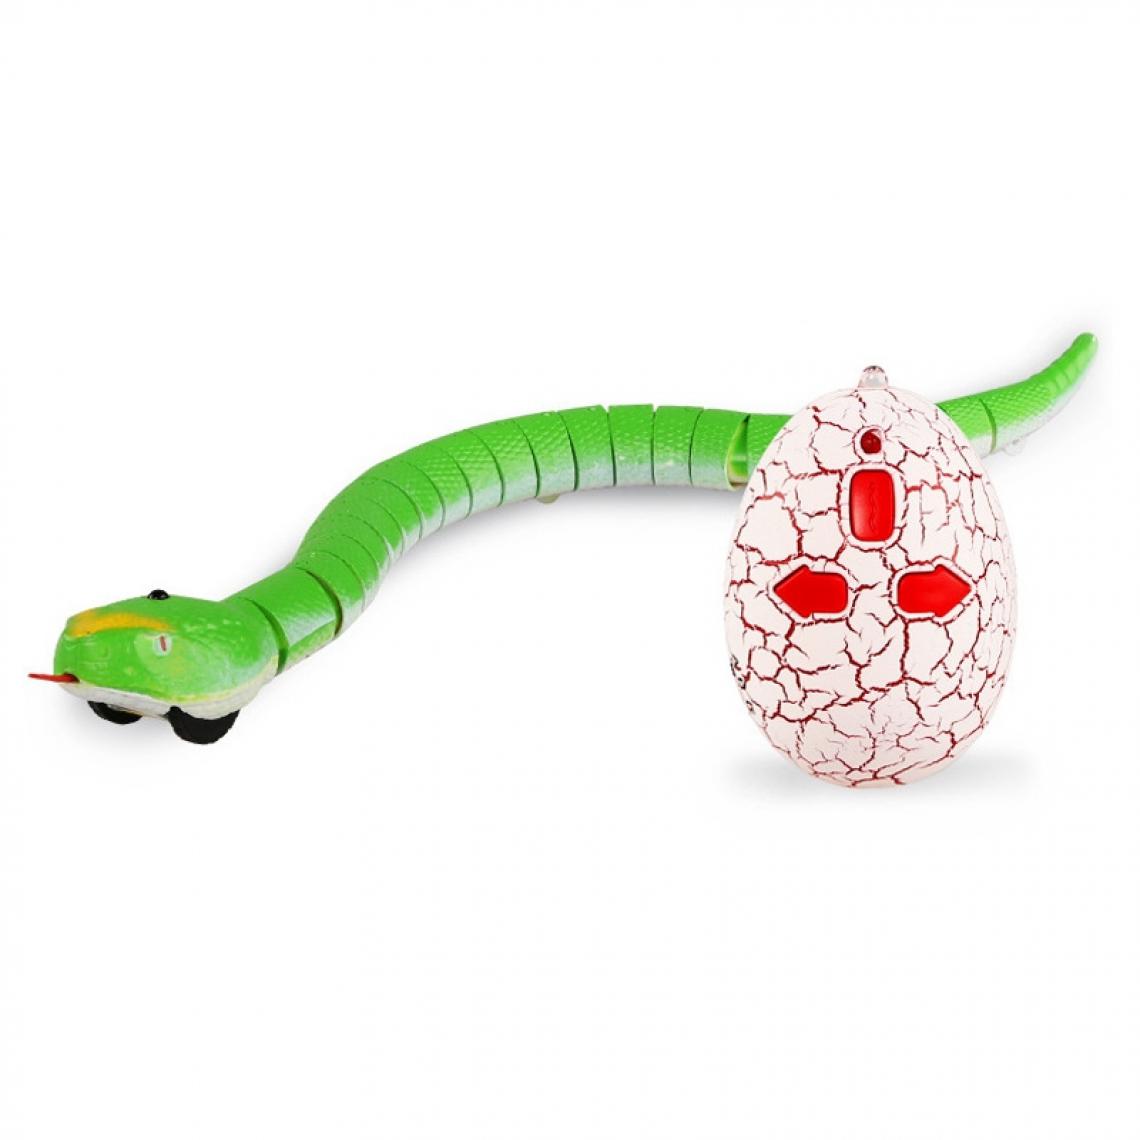 Wewoo - Farce & attrape vert Tricky Funny Toy télécommande infrarouge effrayant Serpent effrayant, taille: 38 * 3.5cm - Magie